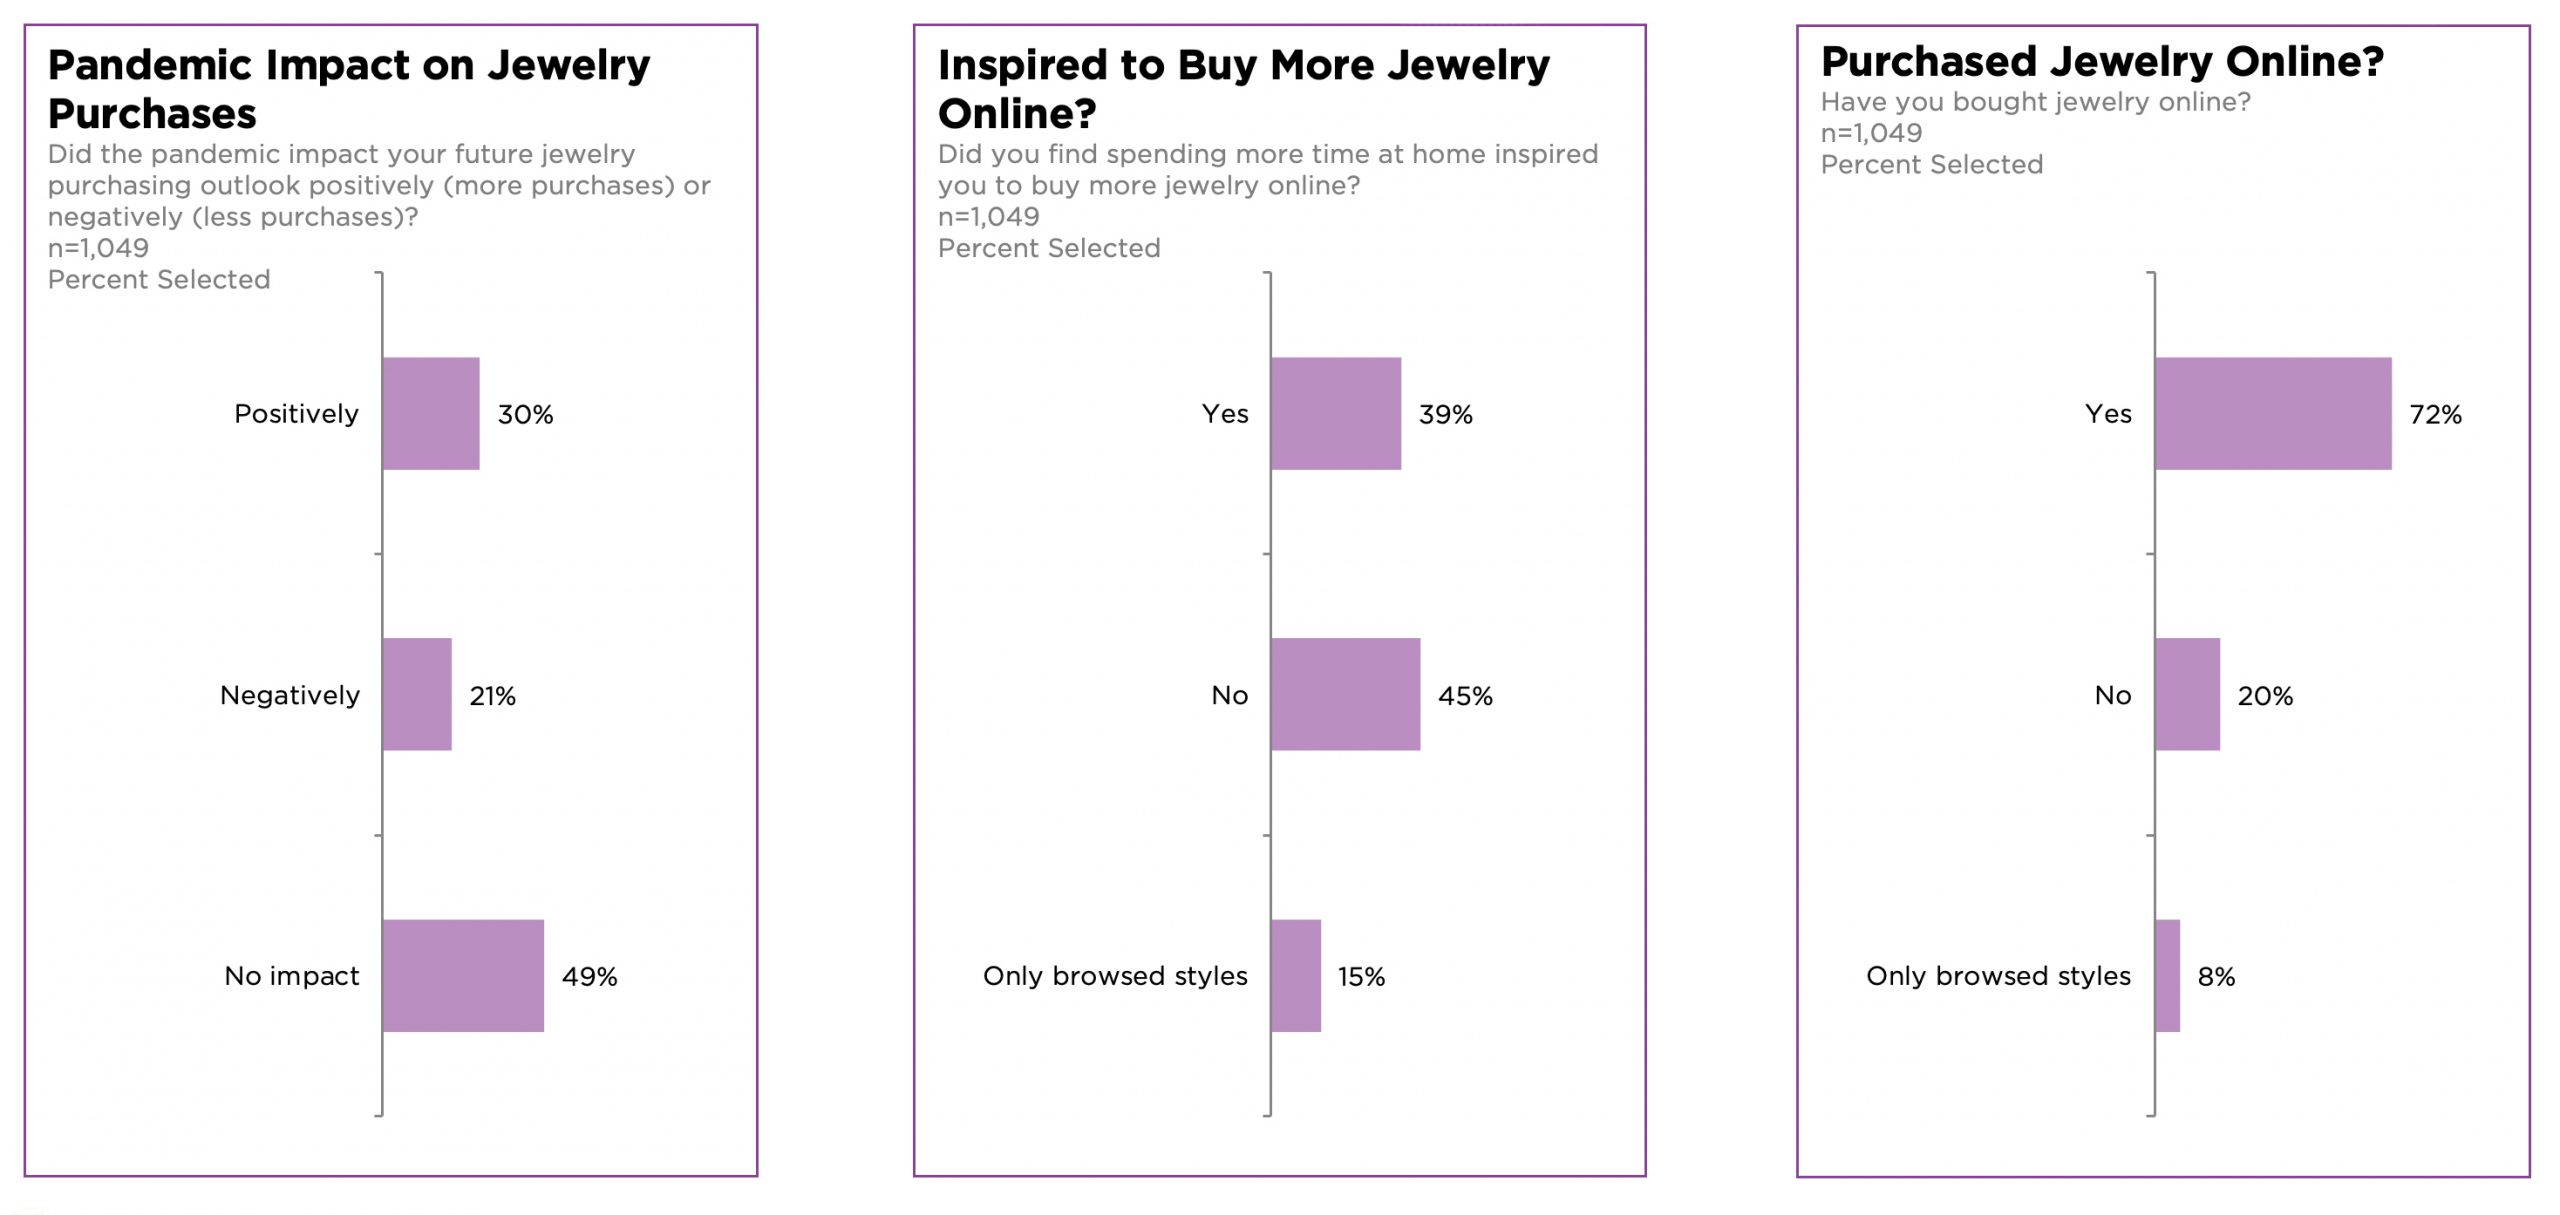 Survey Reveals the Pandemic Had Some Positive Impact on the Jewelry Industry